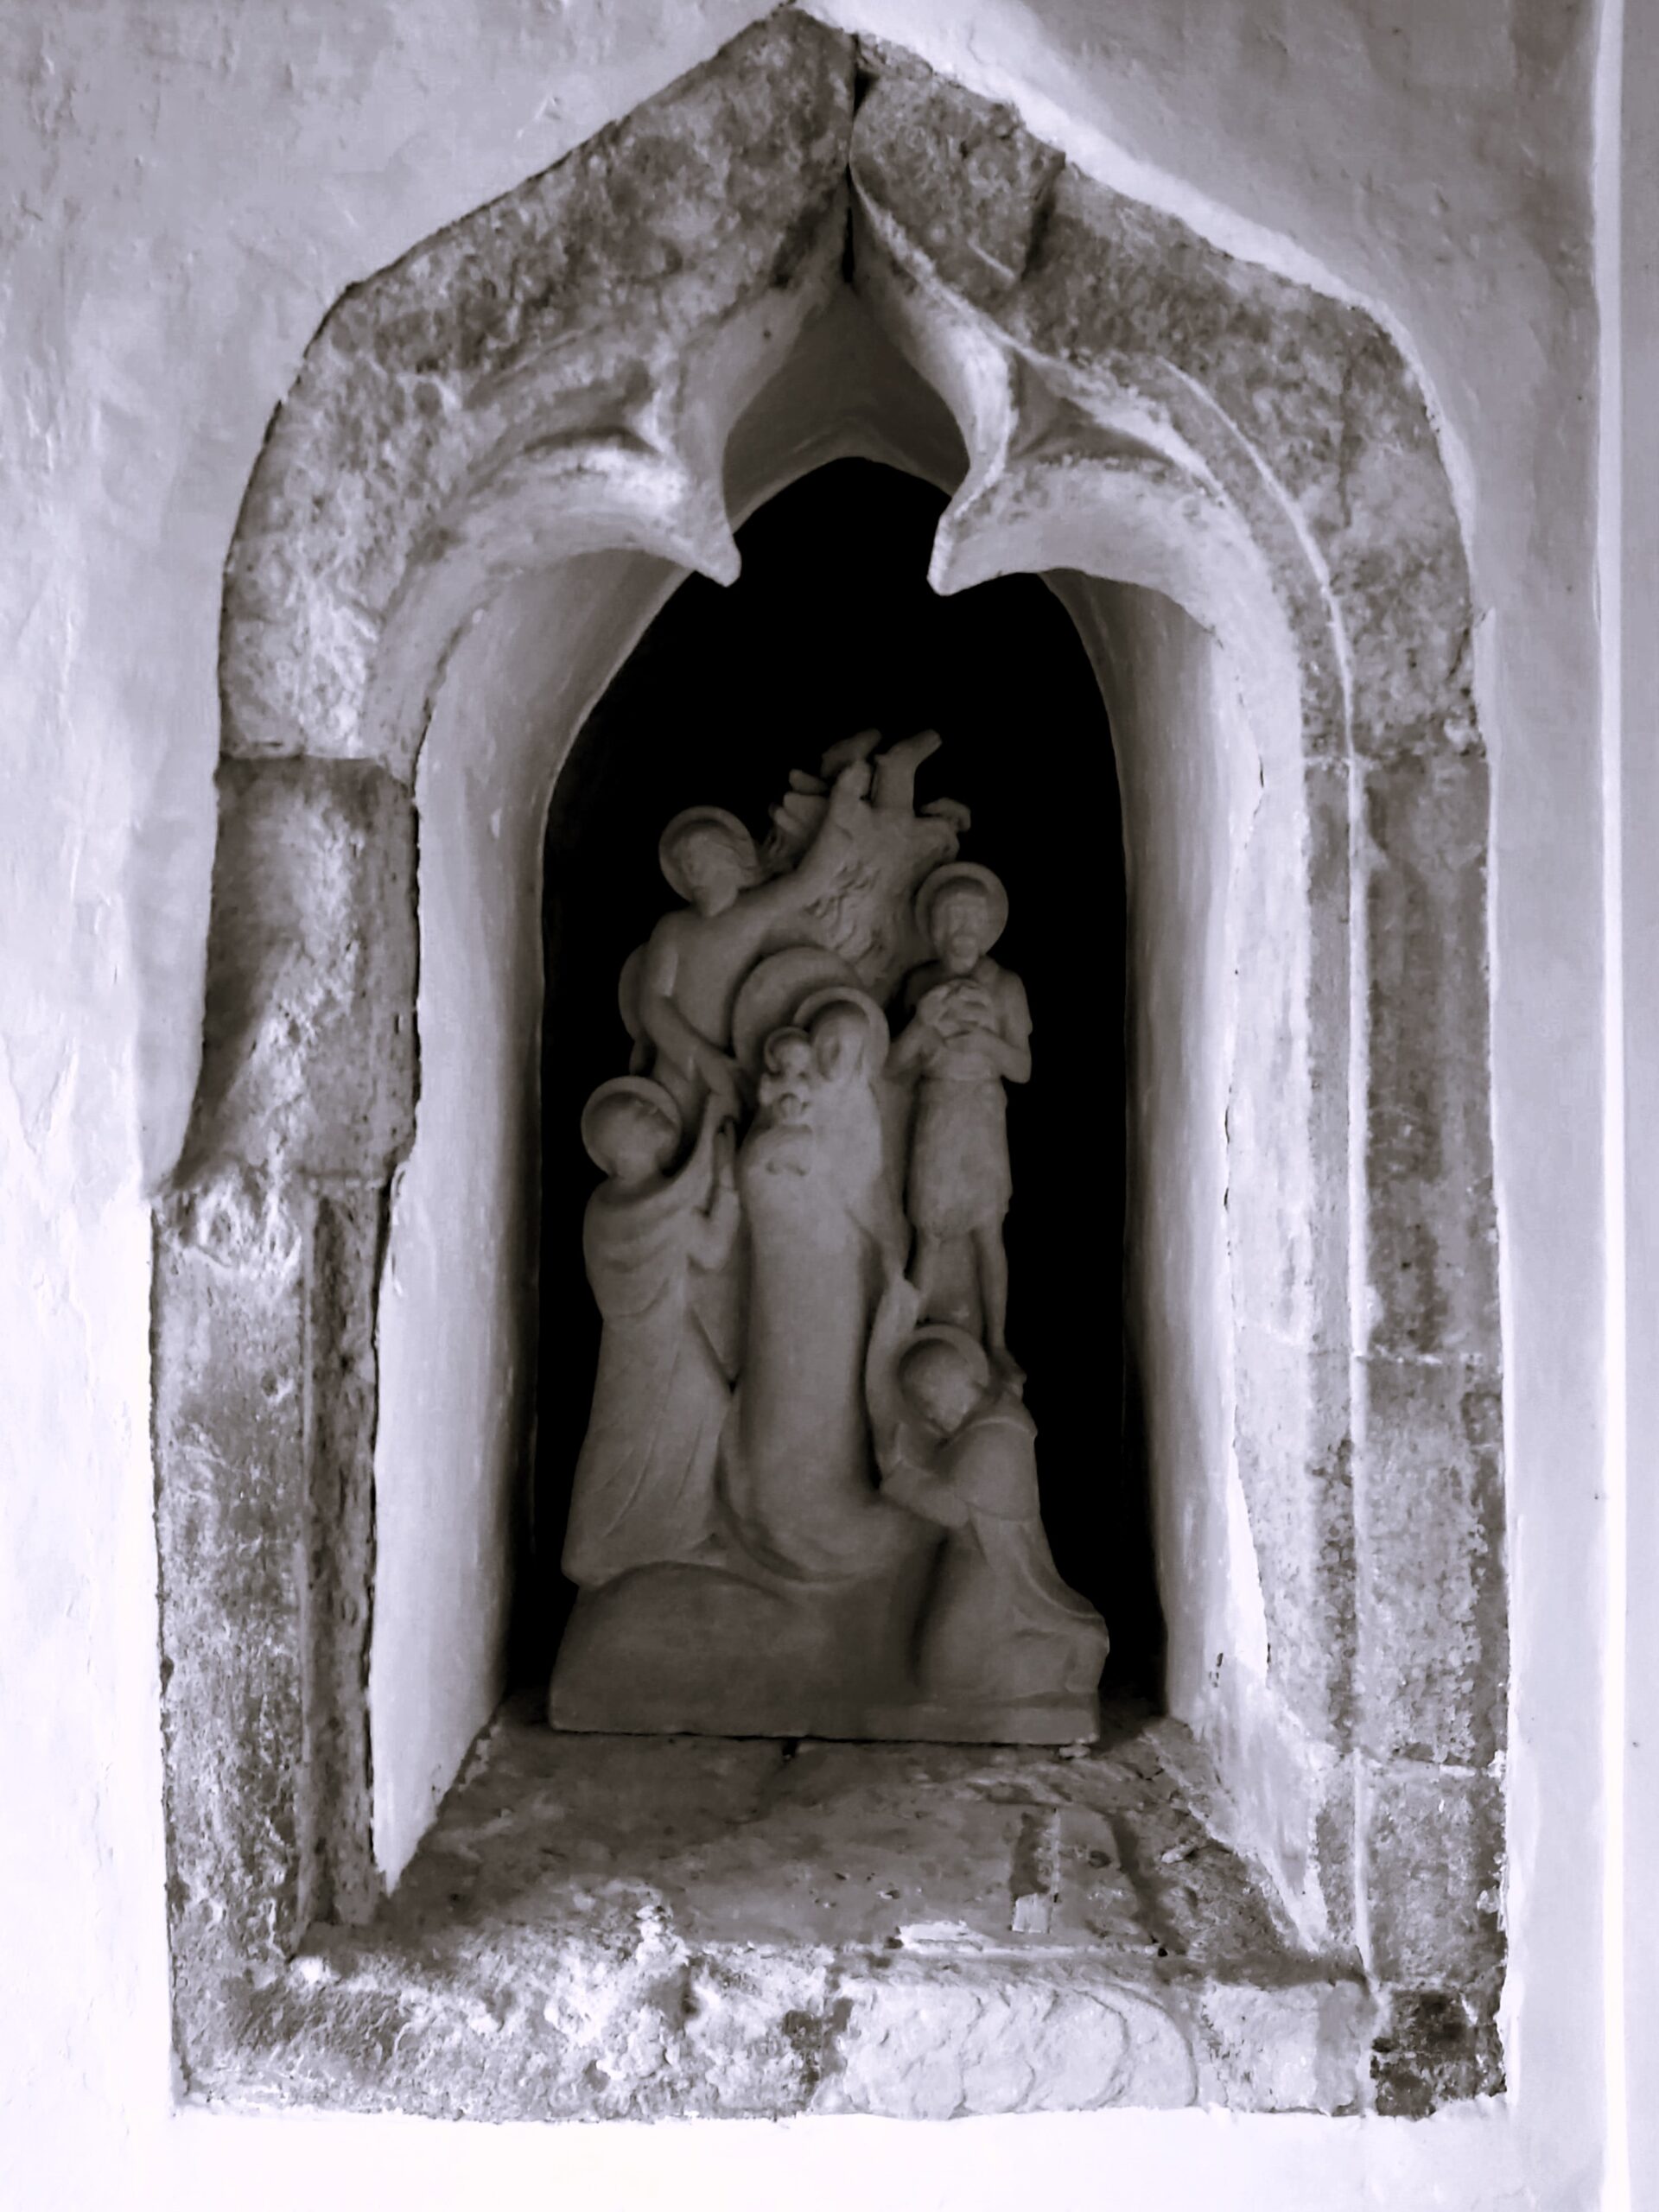 A carved religious piece in The Friars Aylesford Priory, Kent, England